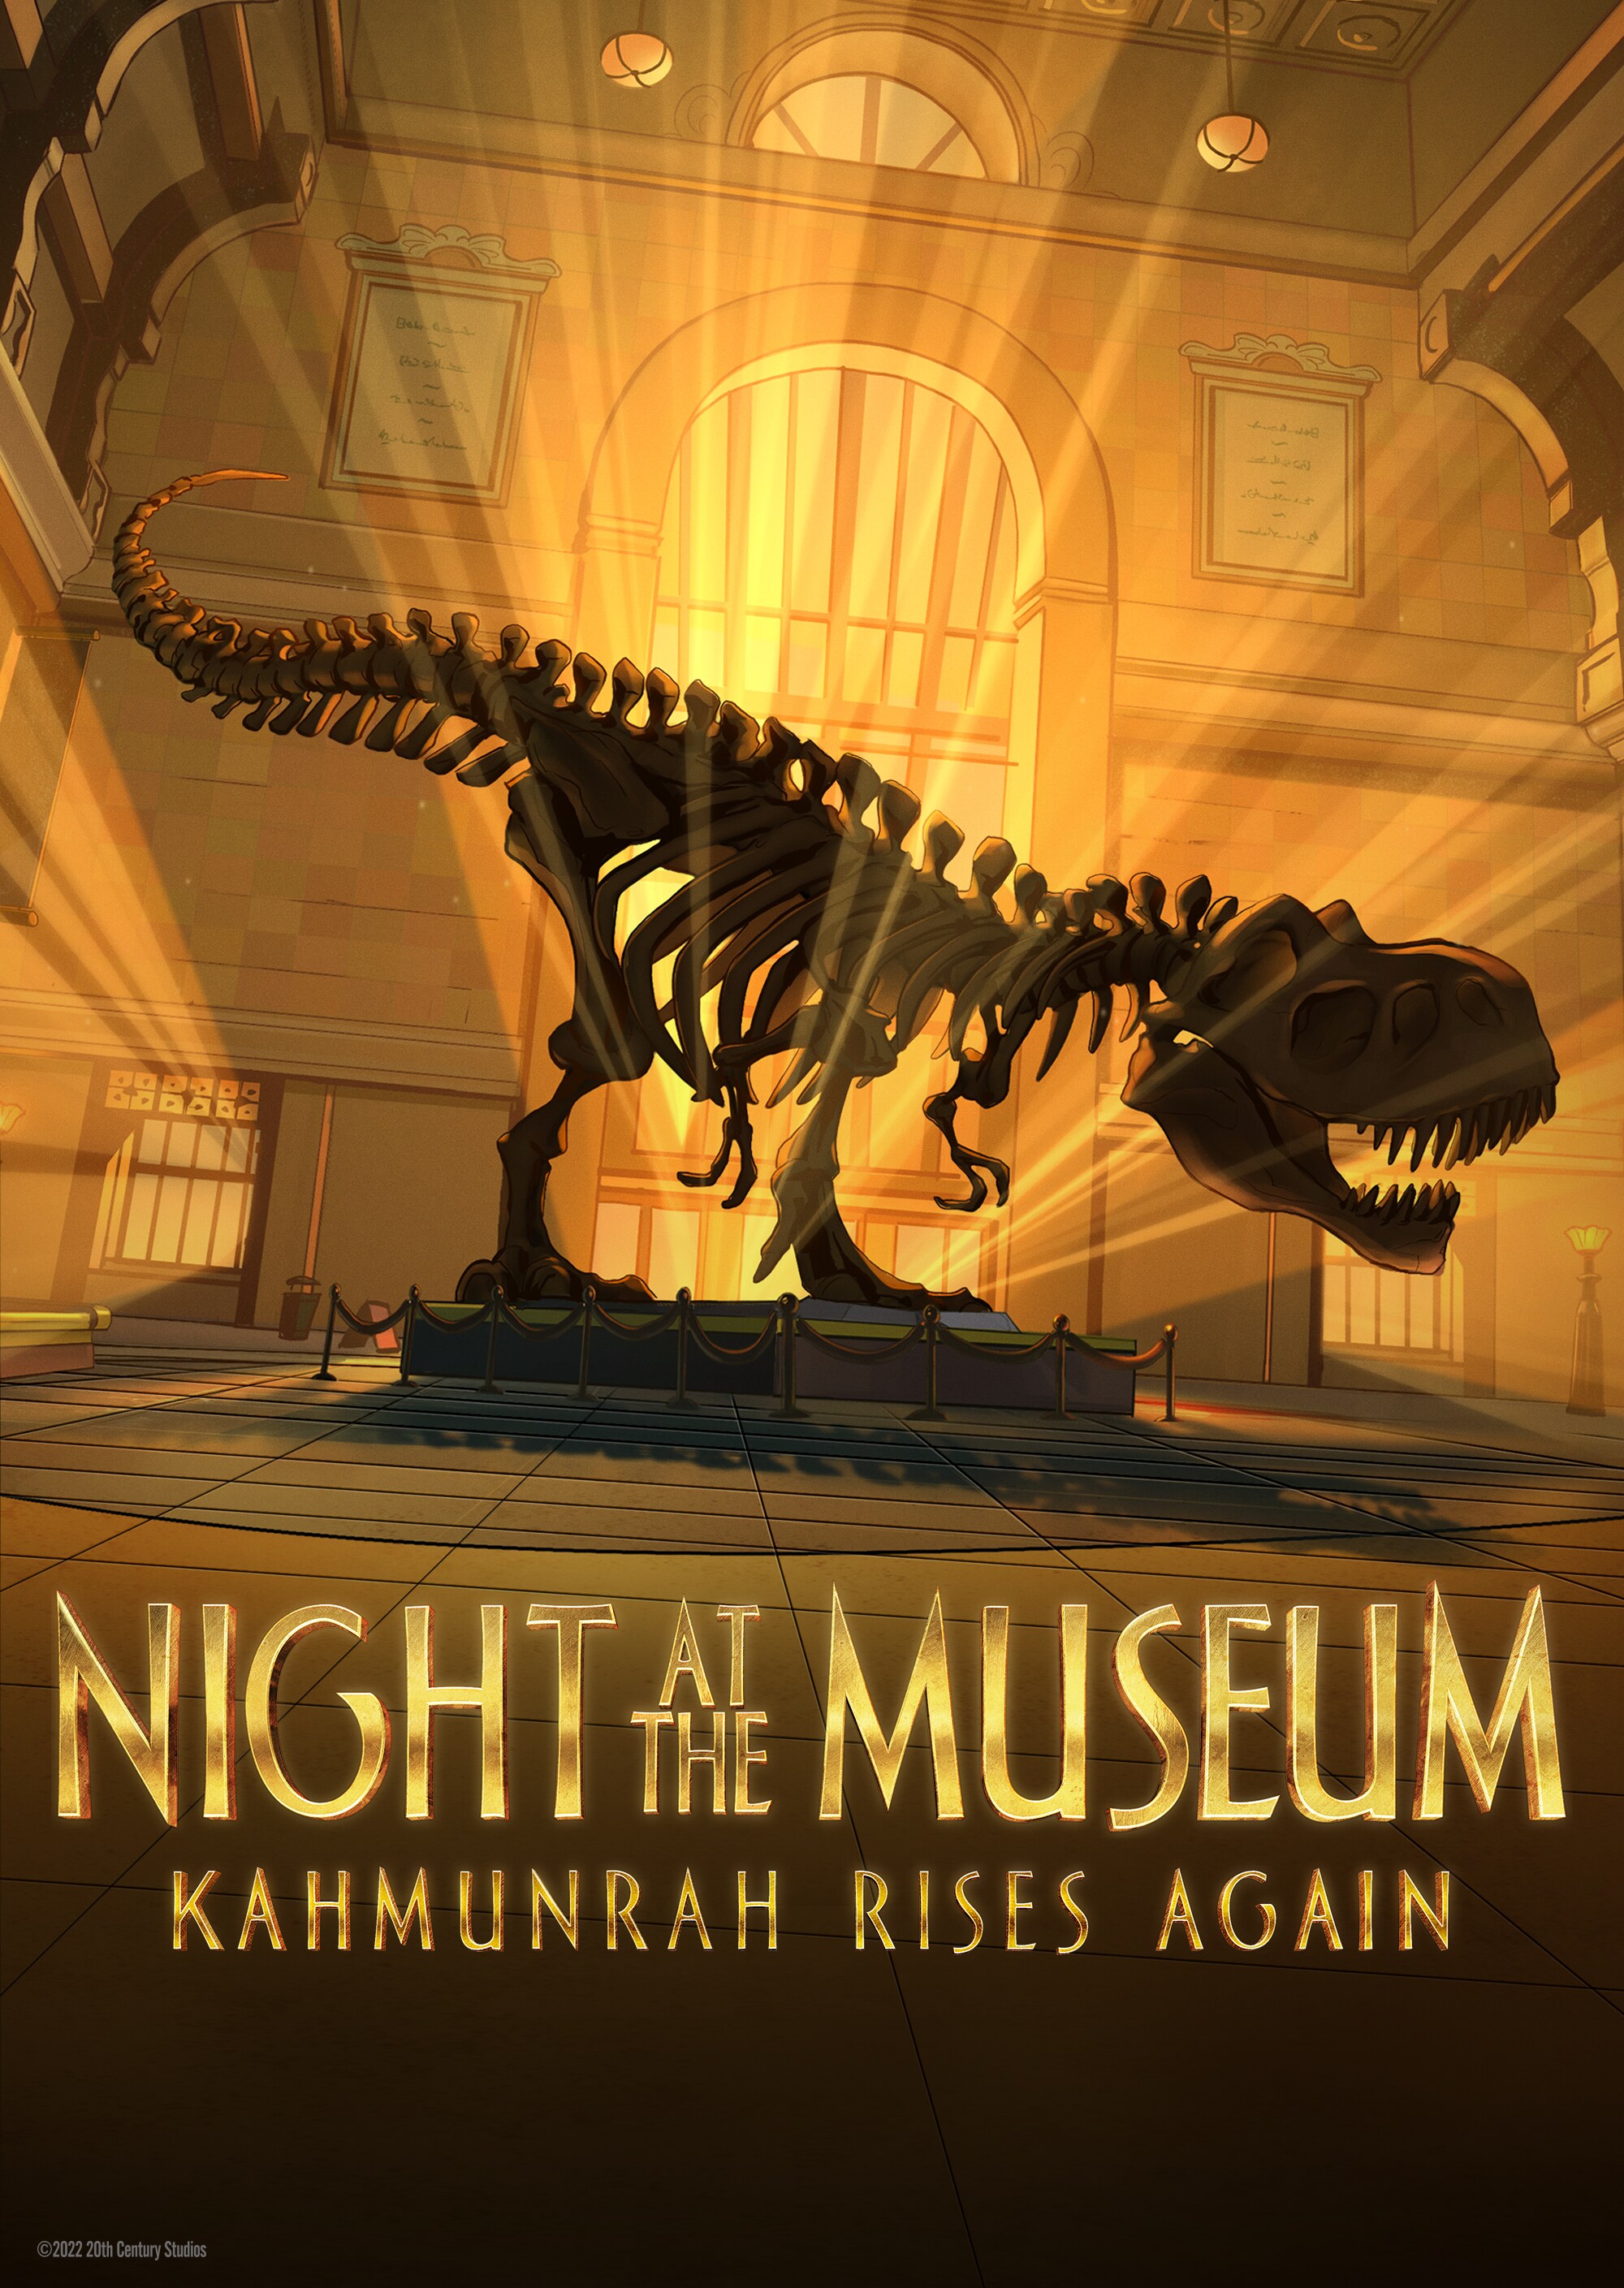 Night At the Museum: Kahumunrah Rises Again | now streaming